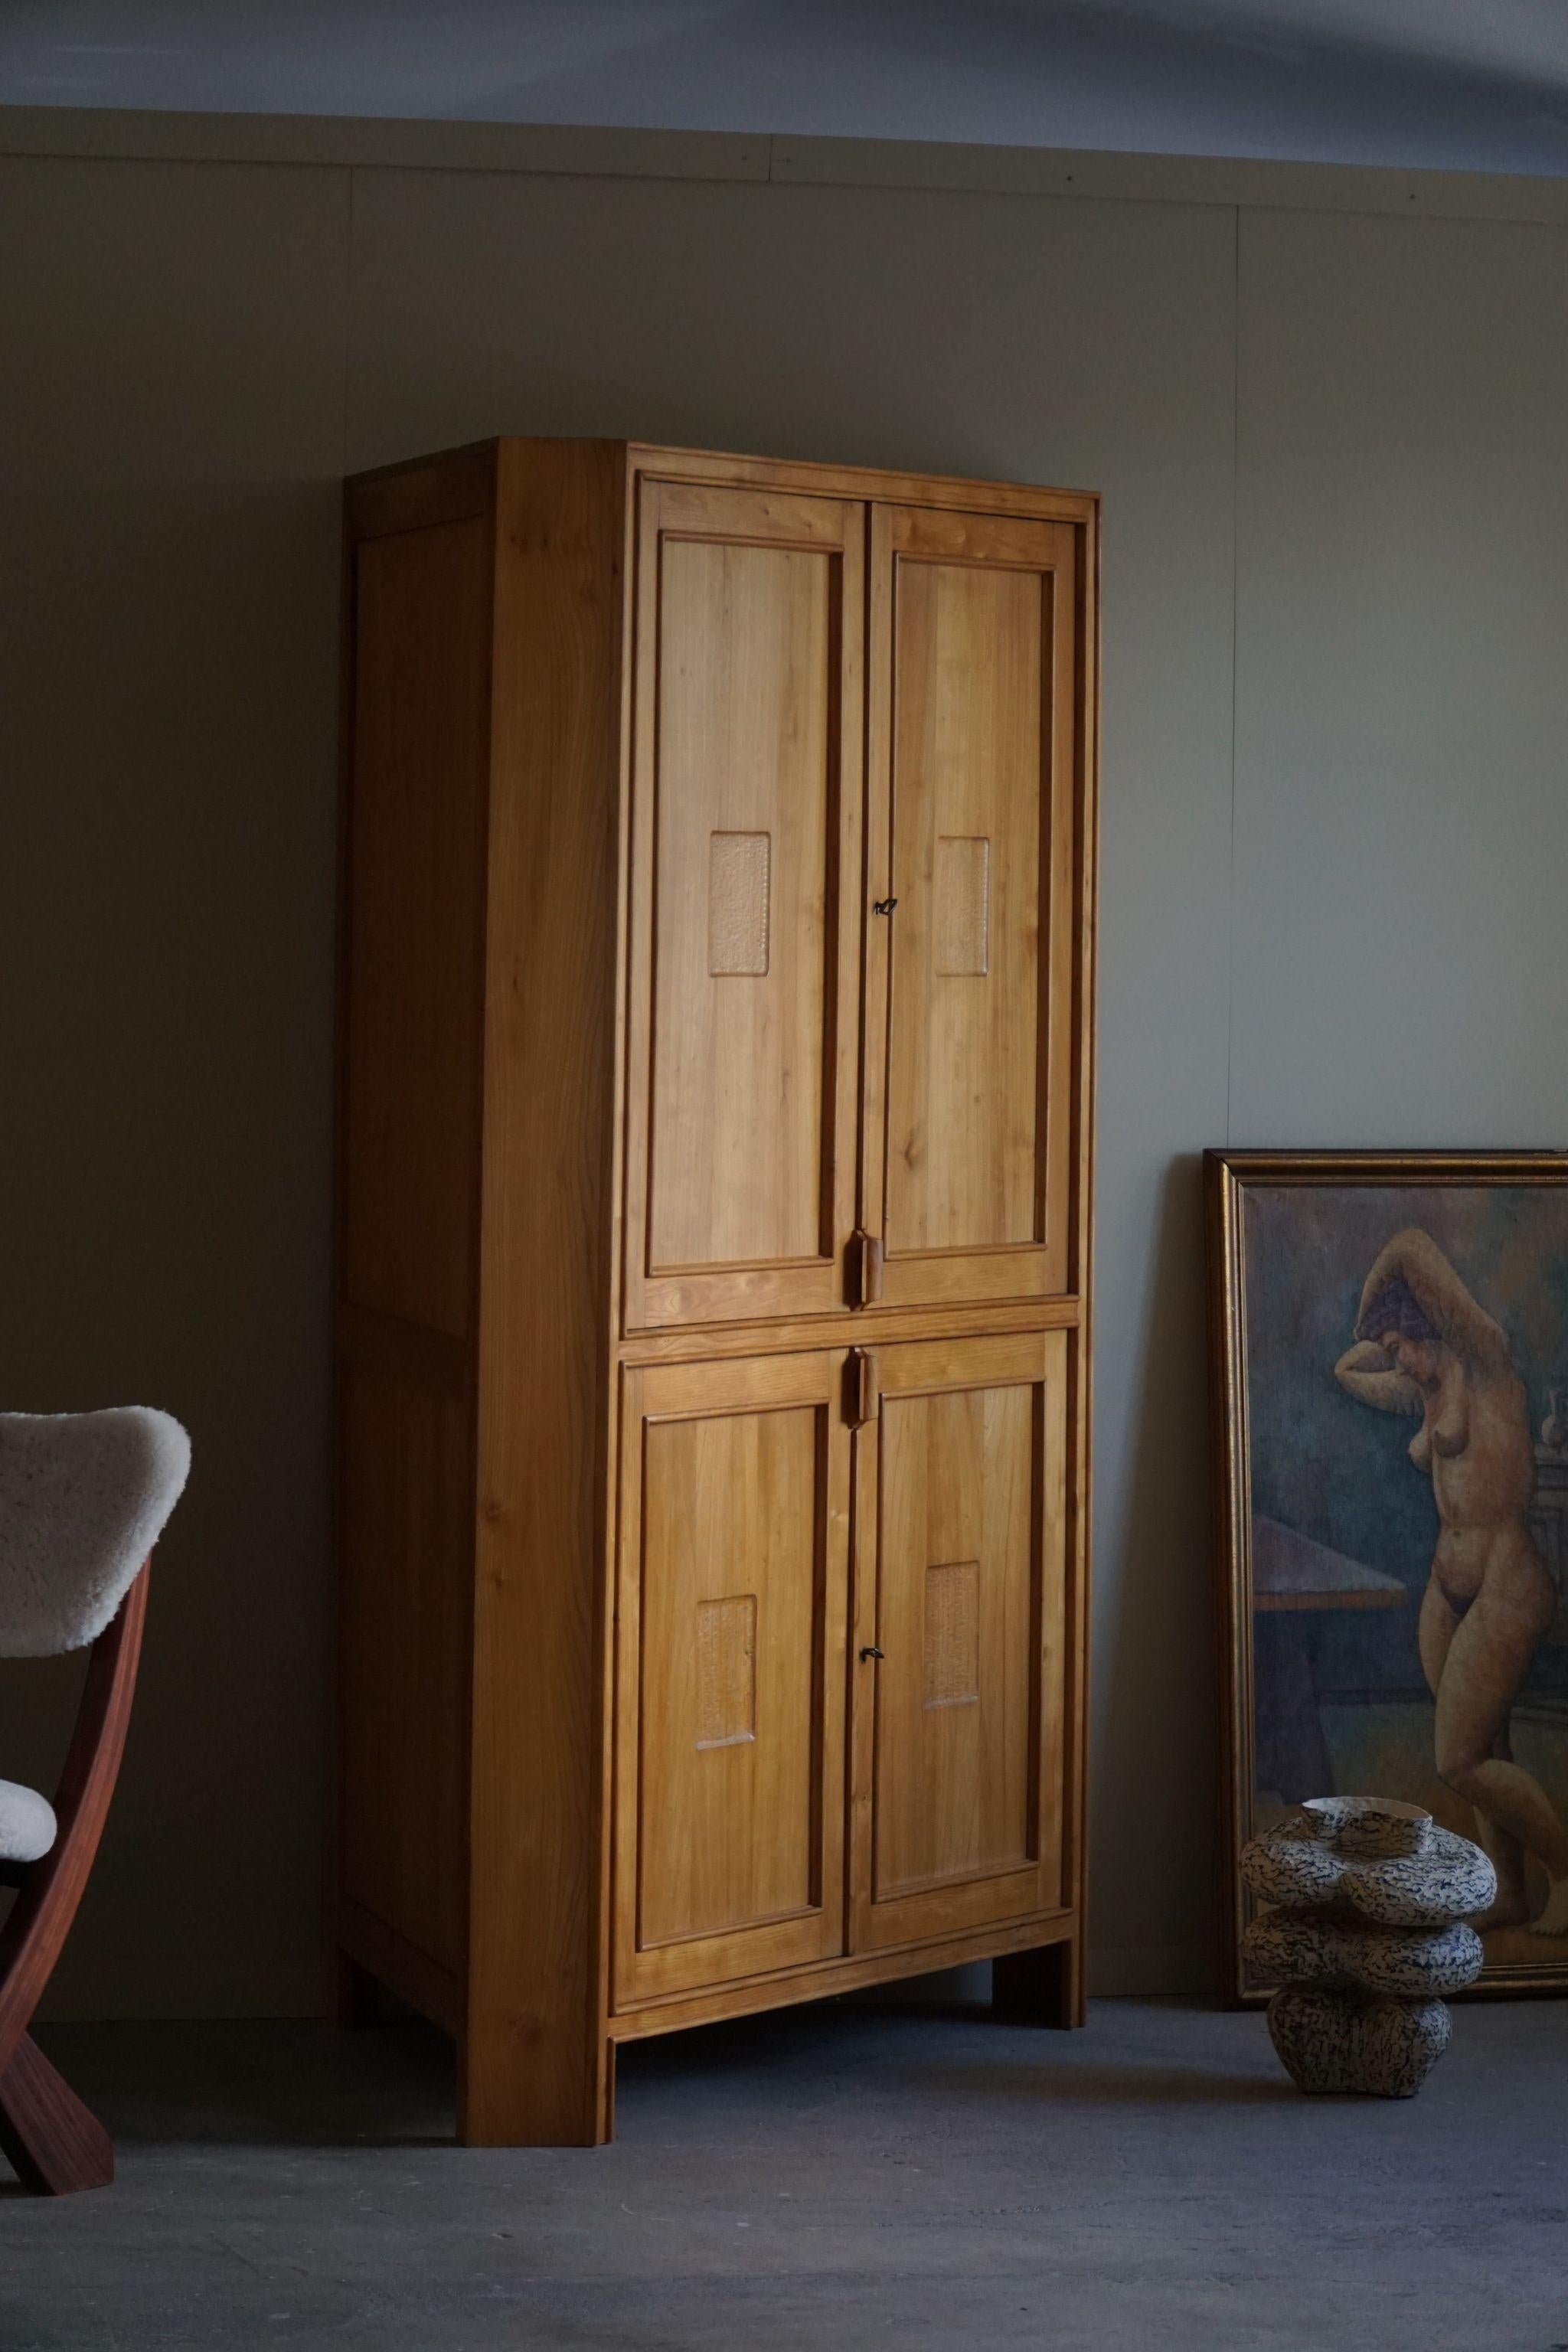 A unique appealing corner cabinet in solid elm. A single made project handcrafted by a Danish cabinetmaker in 1960s. Such nice details and lots of storage space in this vintage piece.

A fantastic brutalist cupboard that will complement many